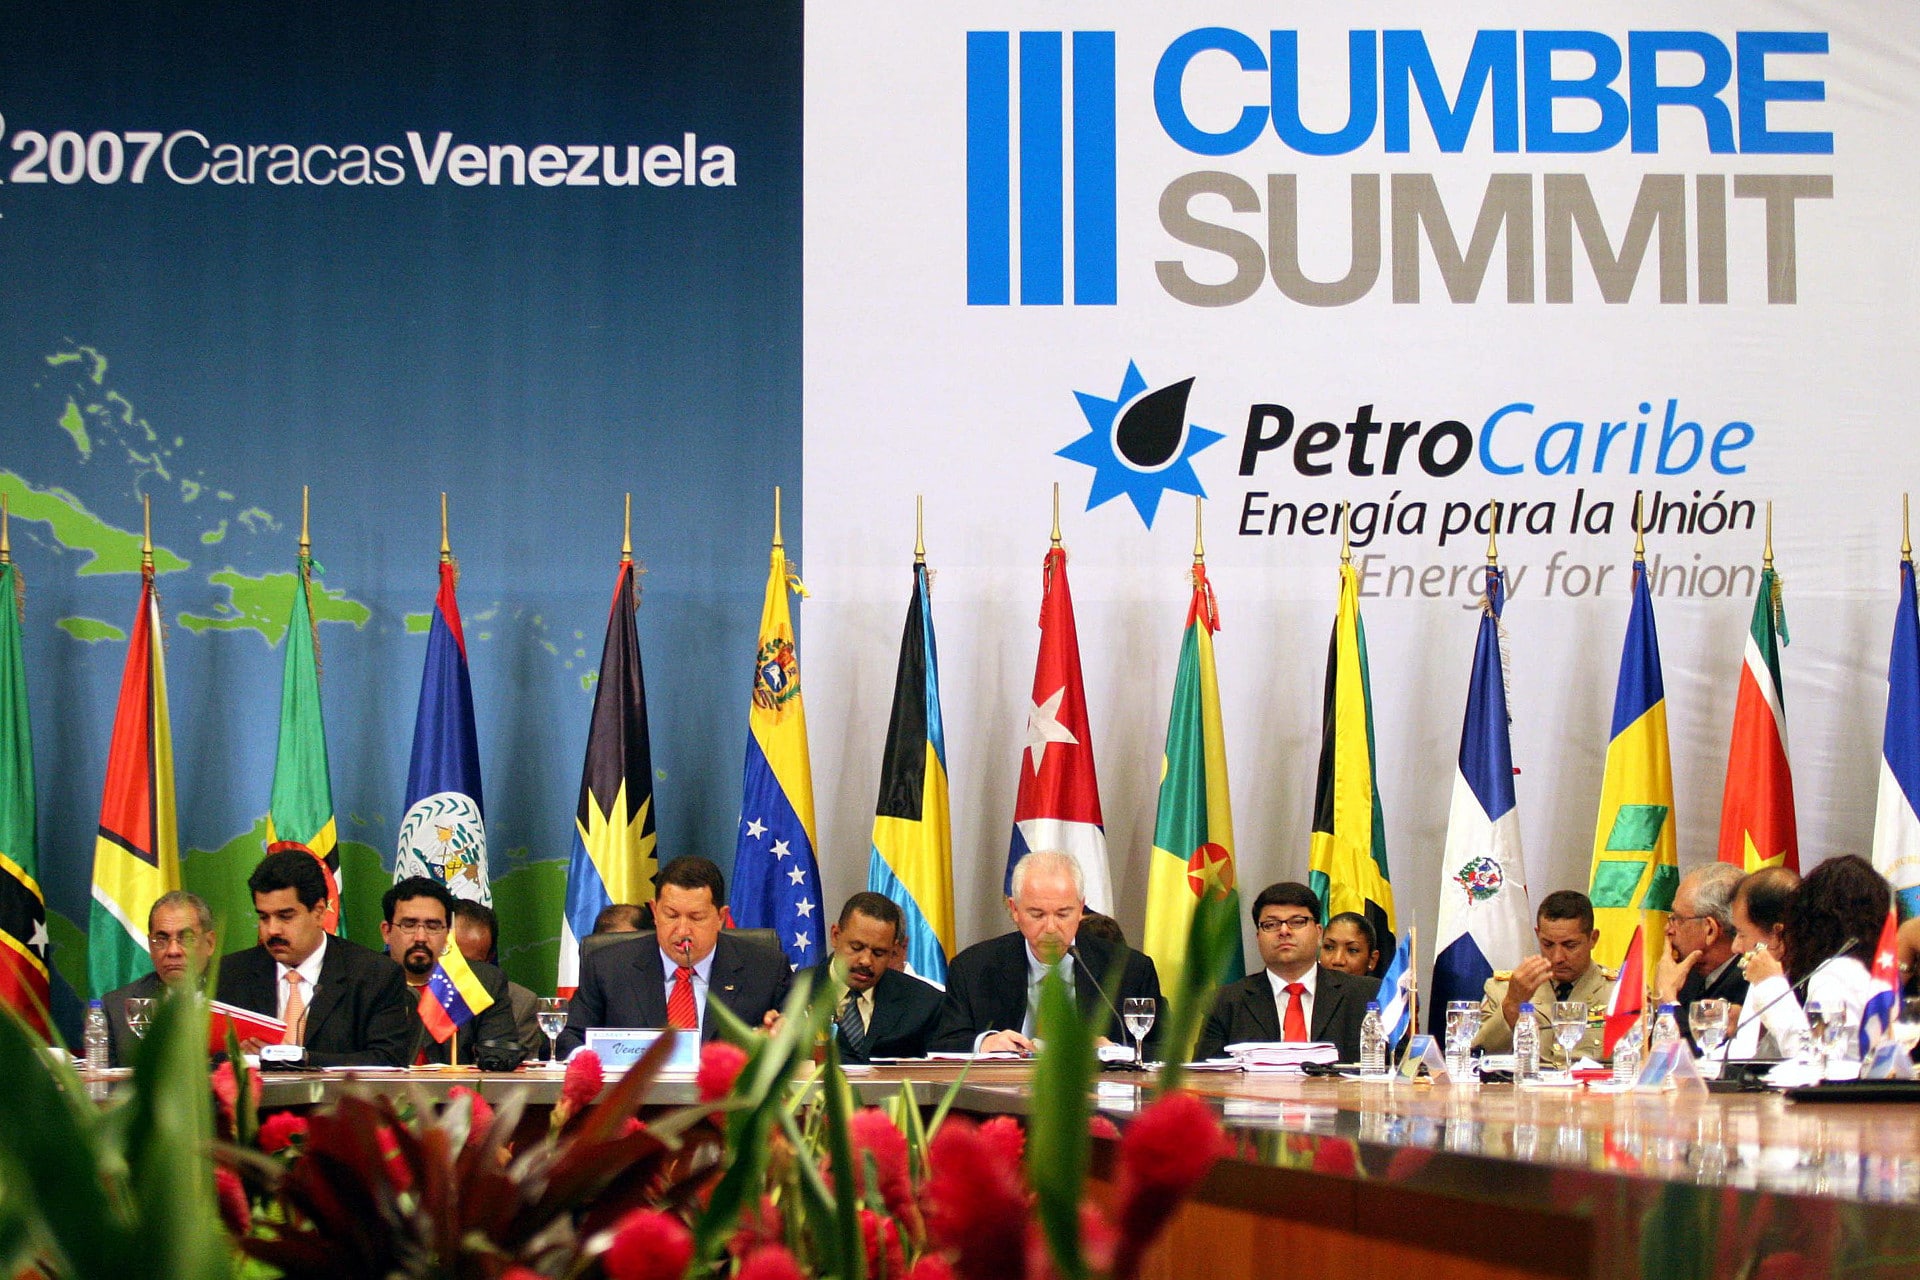 Opening session of the Petro Caribe 2007 Caracas Summit with President Hugo Chávez chairing the session along with then minister for foreign affairs, Nicolás Maduro. File photo.